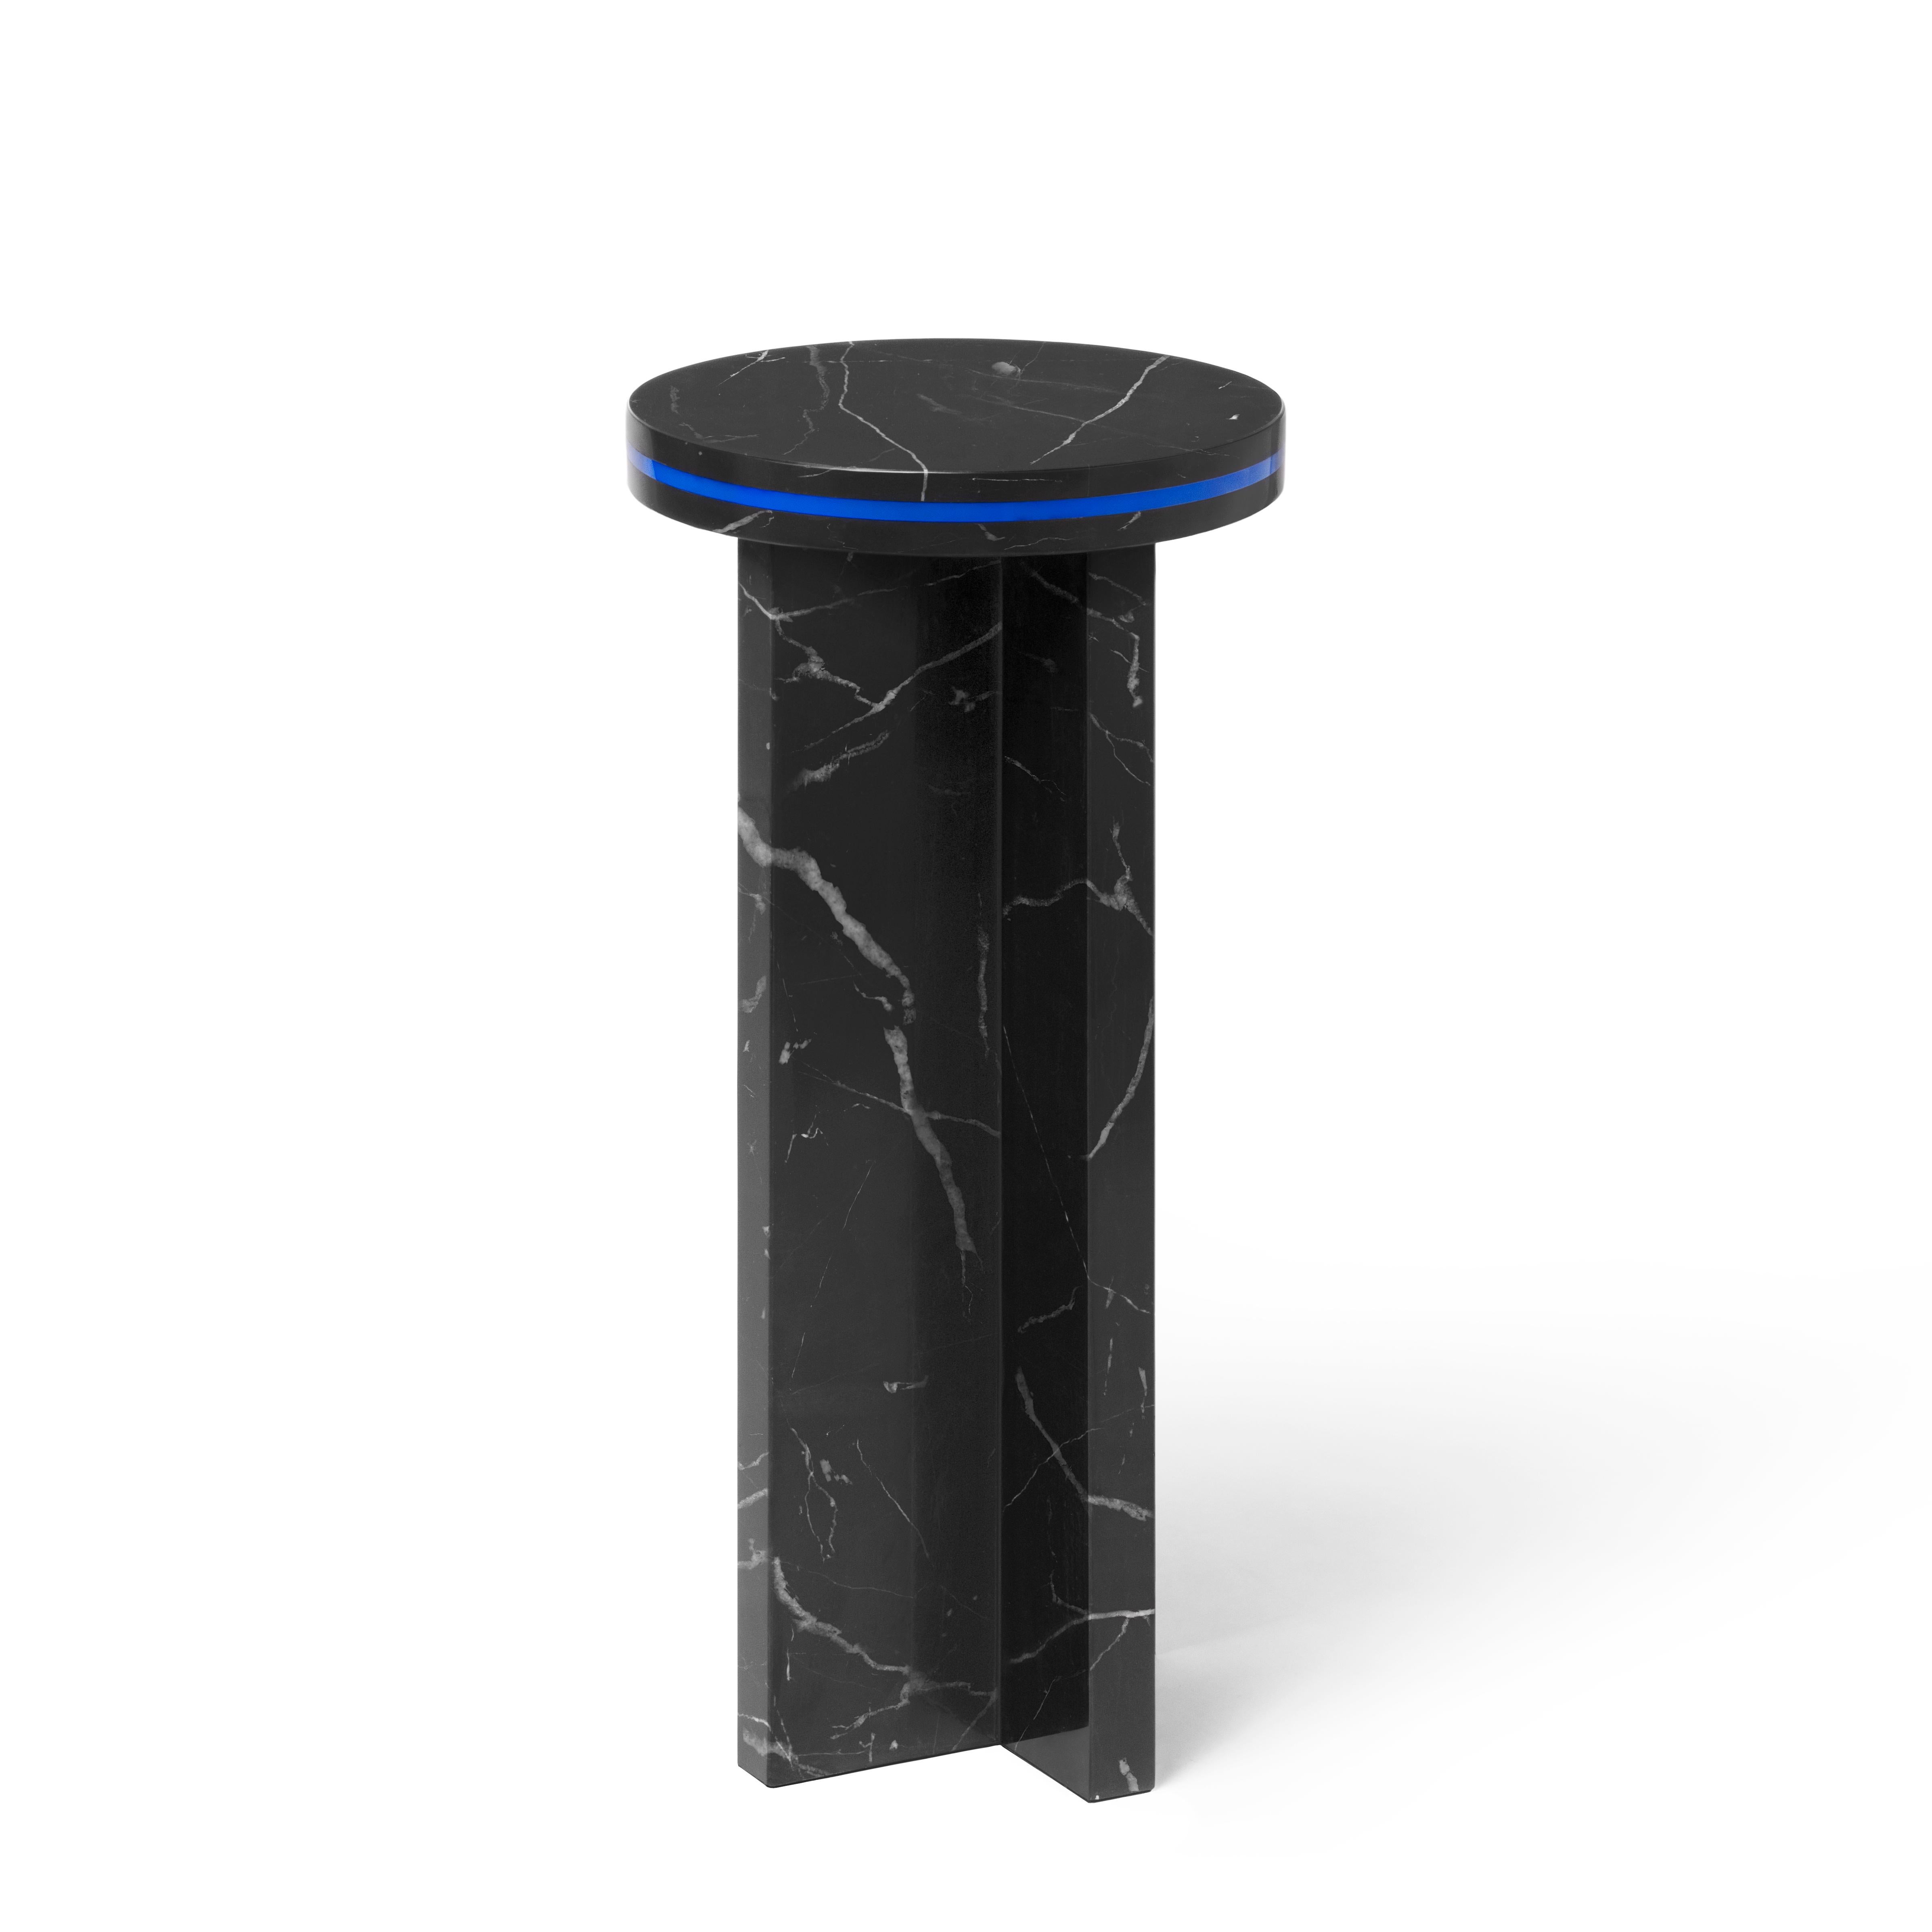 'DISLOCATION' collection by Buzao, small table
Black Marquina marble
Measures: 26 x 26 x H 54 cm

Studio Buzao from Guangzhou (China) is exploring innovation with furniture and lighting design. From marble to lava stone, from electroplated stainless